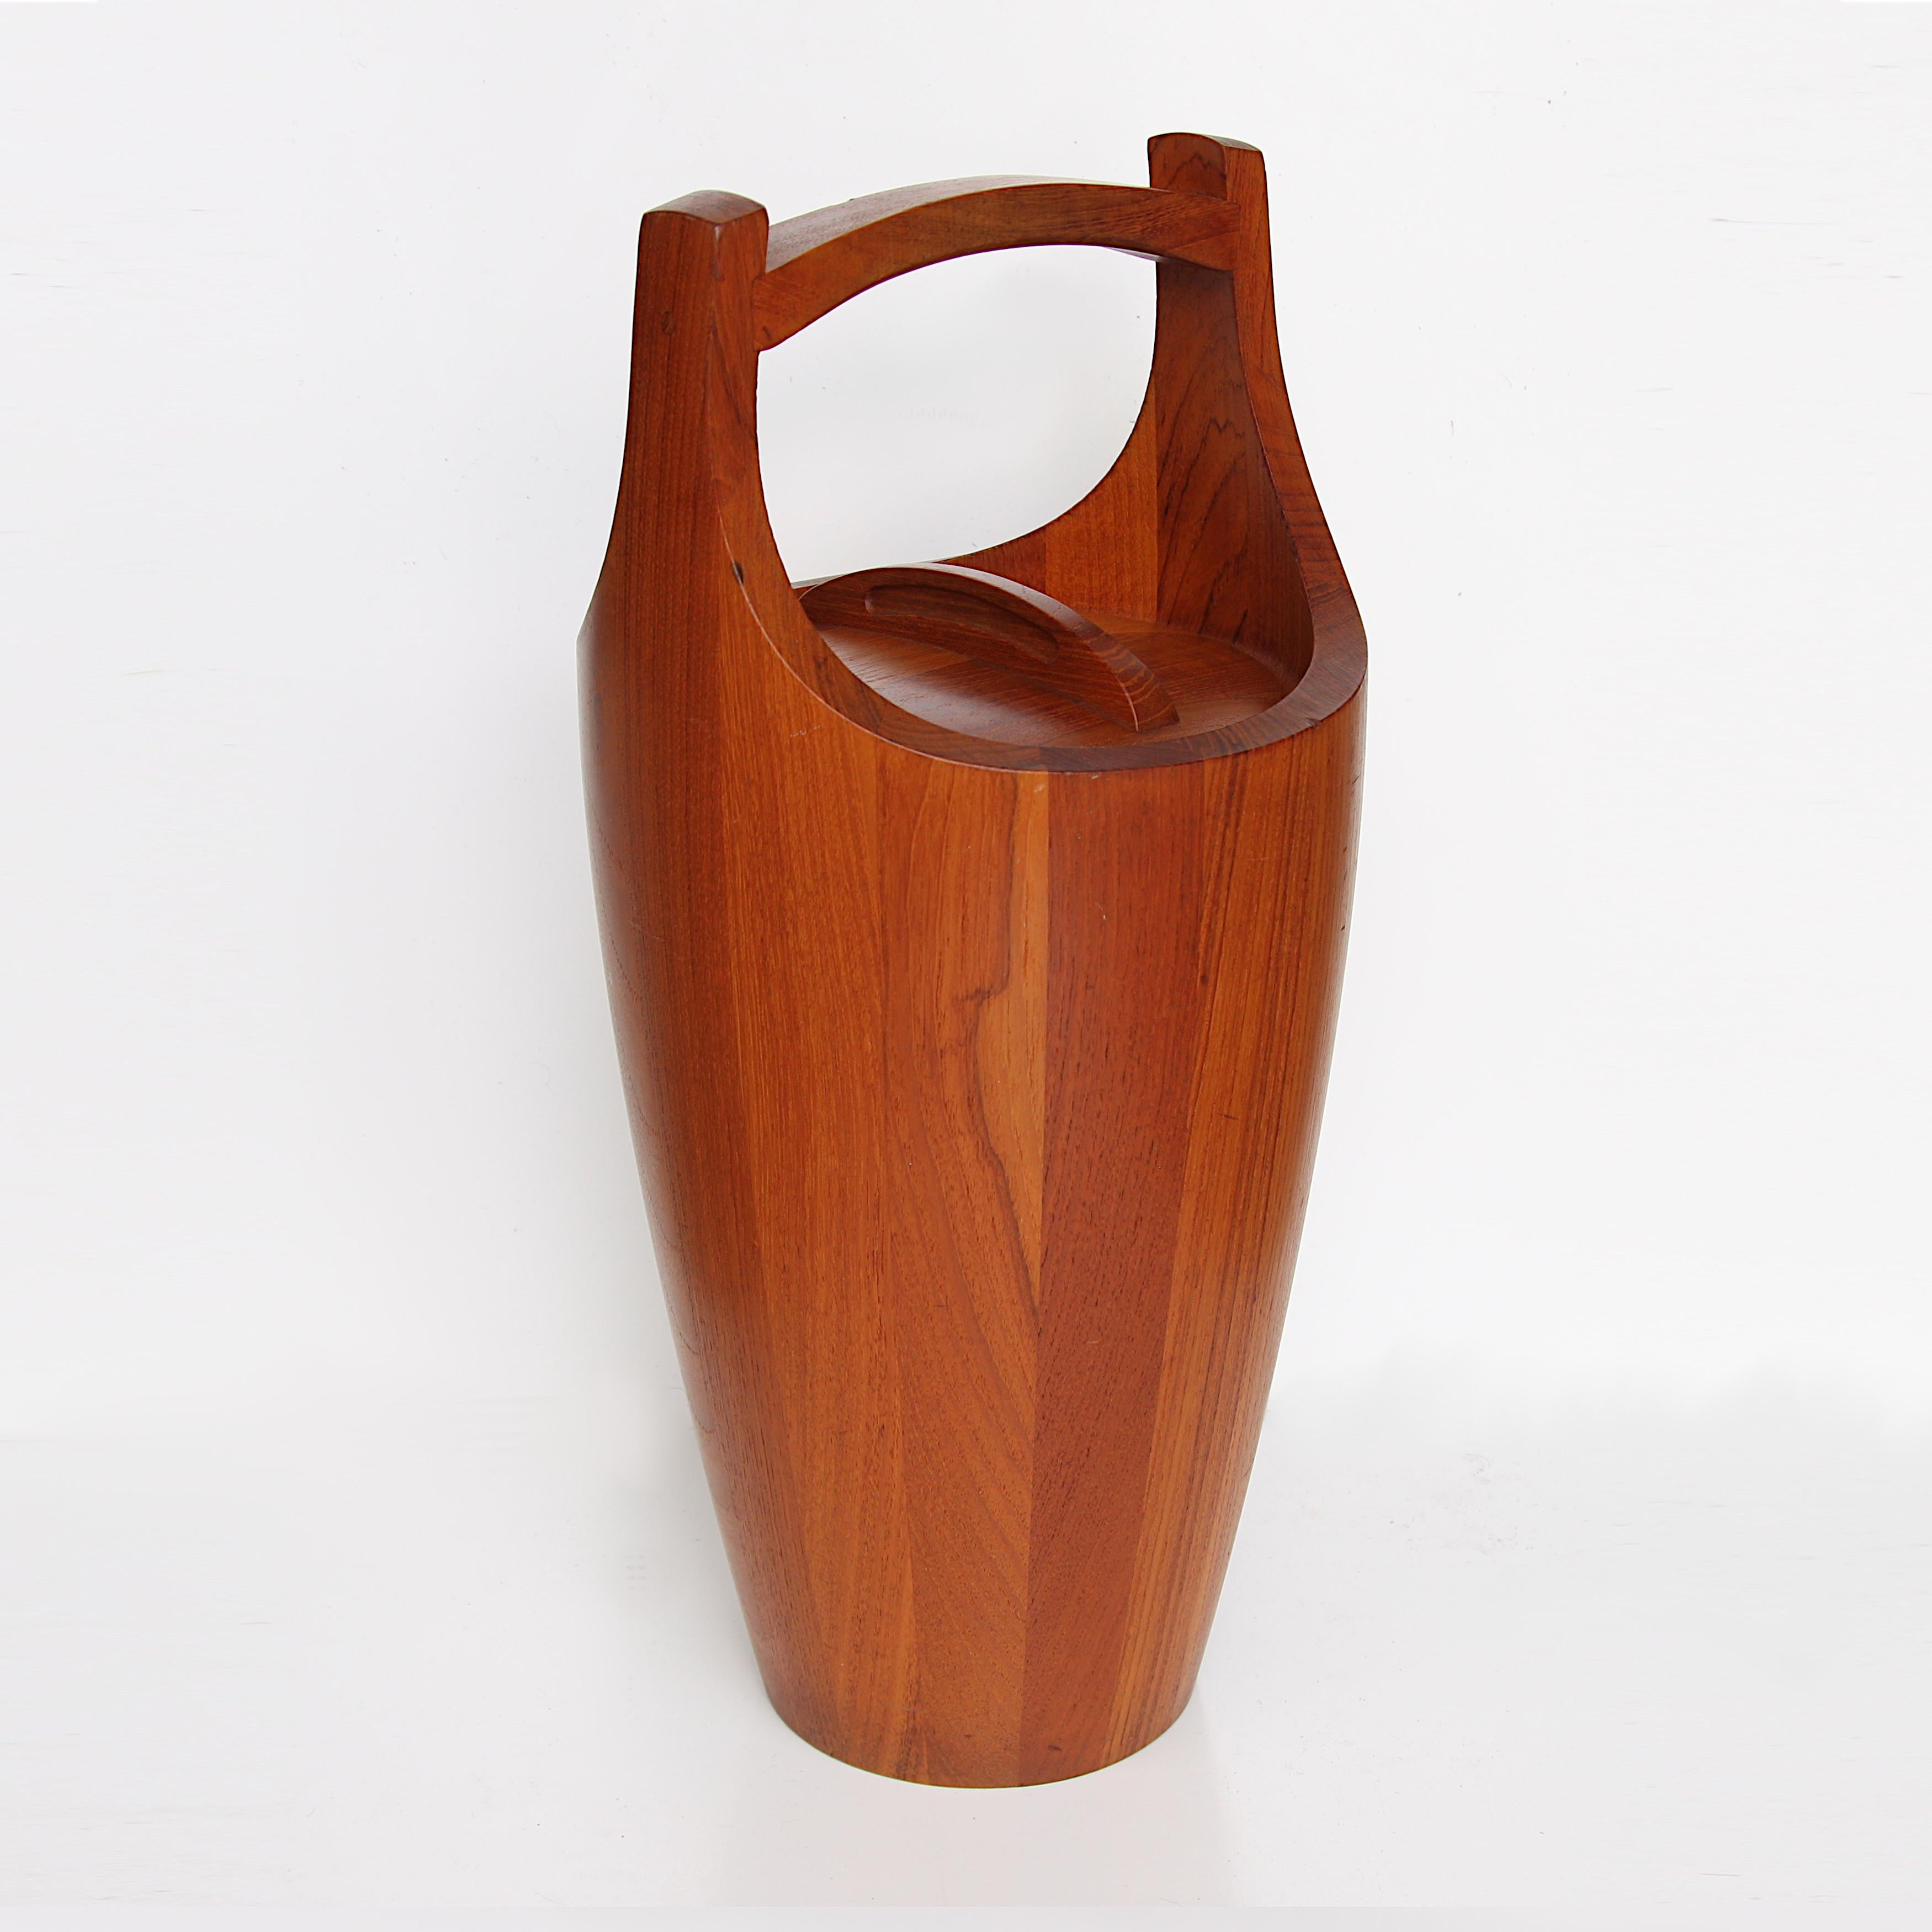 Large teak ice bucket by Jens Quistgaard for Dansk Designs of Denmark. Excellent original condition with extremely little wear!